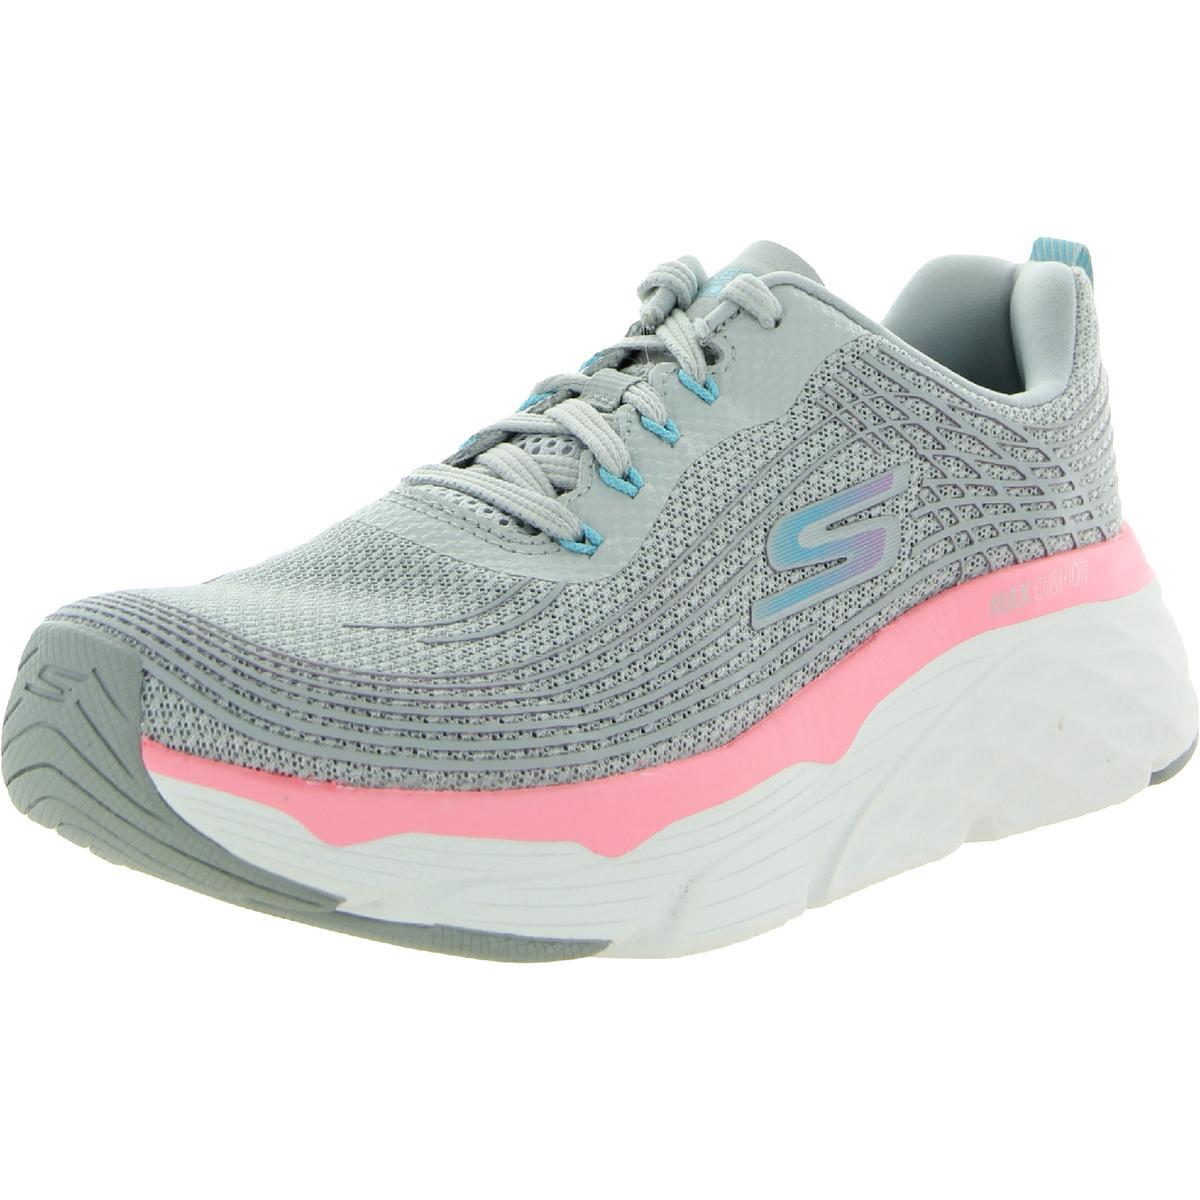 Skechers Womens Max Cushioning Elite Workout Running Shoes Sneakers Bhfo 6016 Grey/Pink